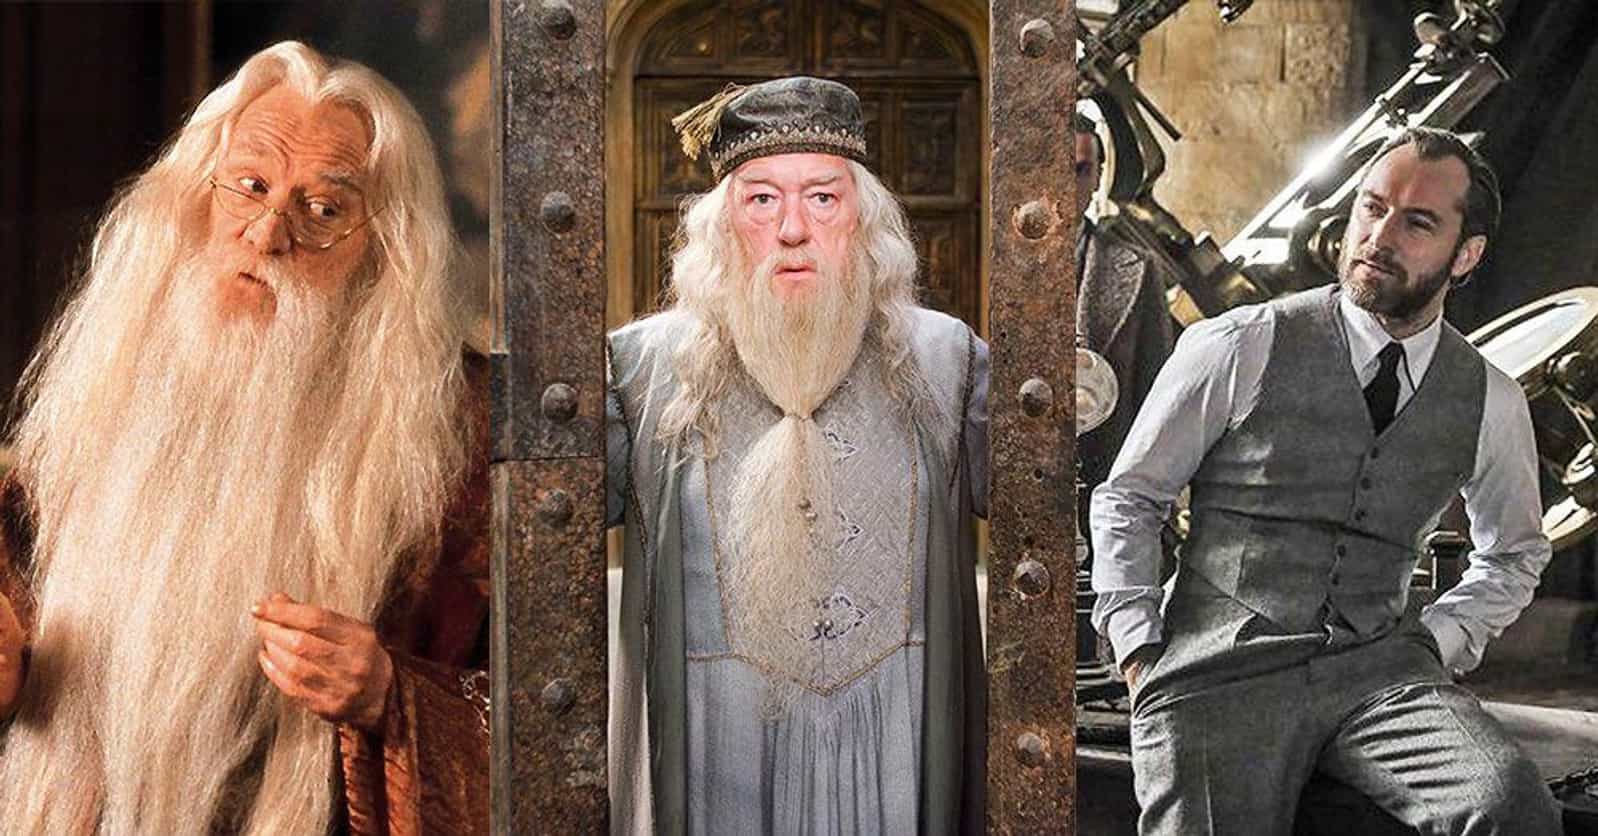 The Three Dumbledore Actors From The 'Harry Potter' Movies, Ranked By Magical Presence